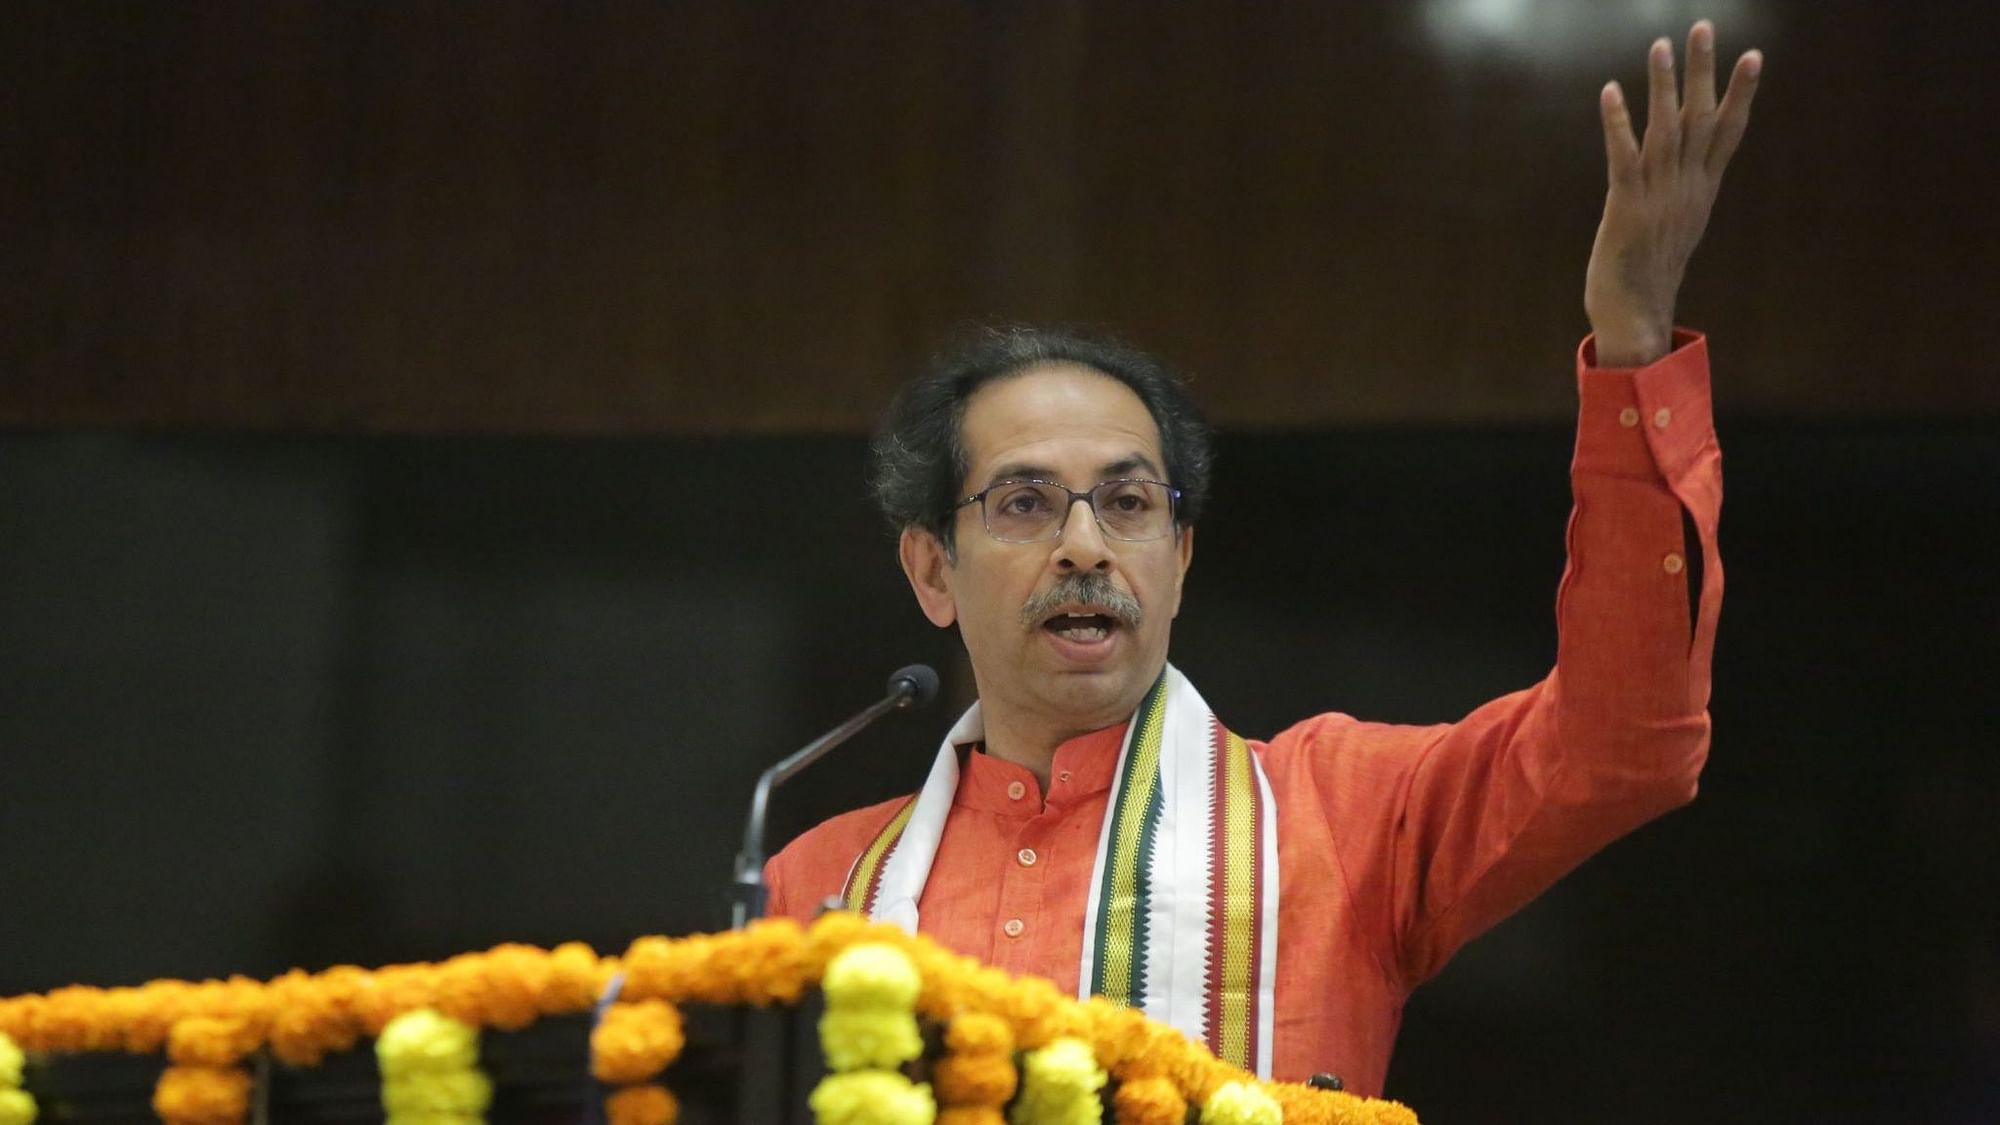 Maharashtra Chief Minister Uddhav Thackeray made the announcements on 26 March.